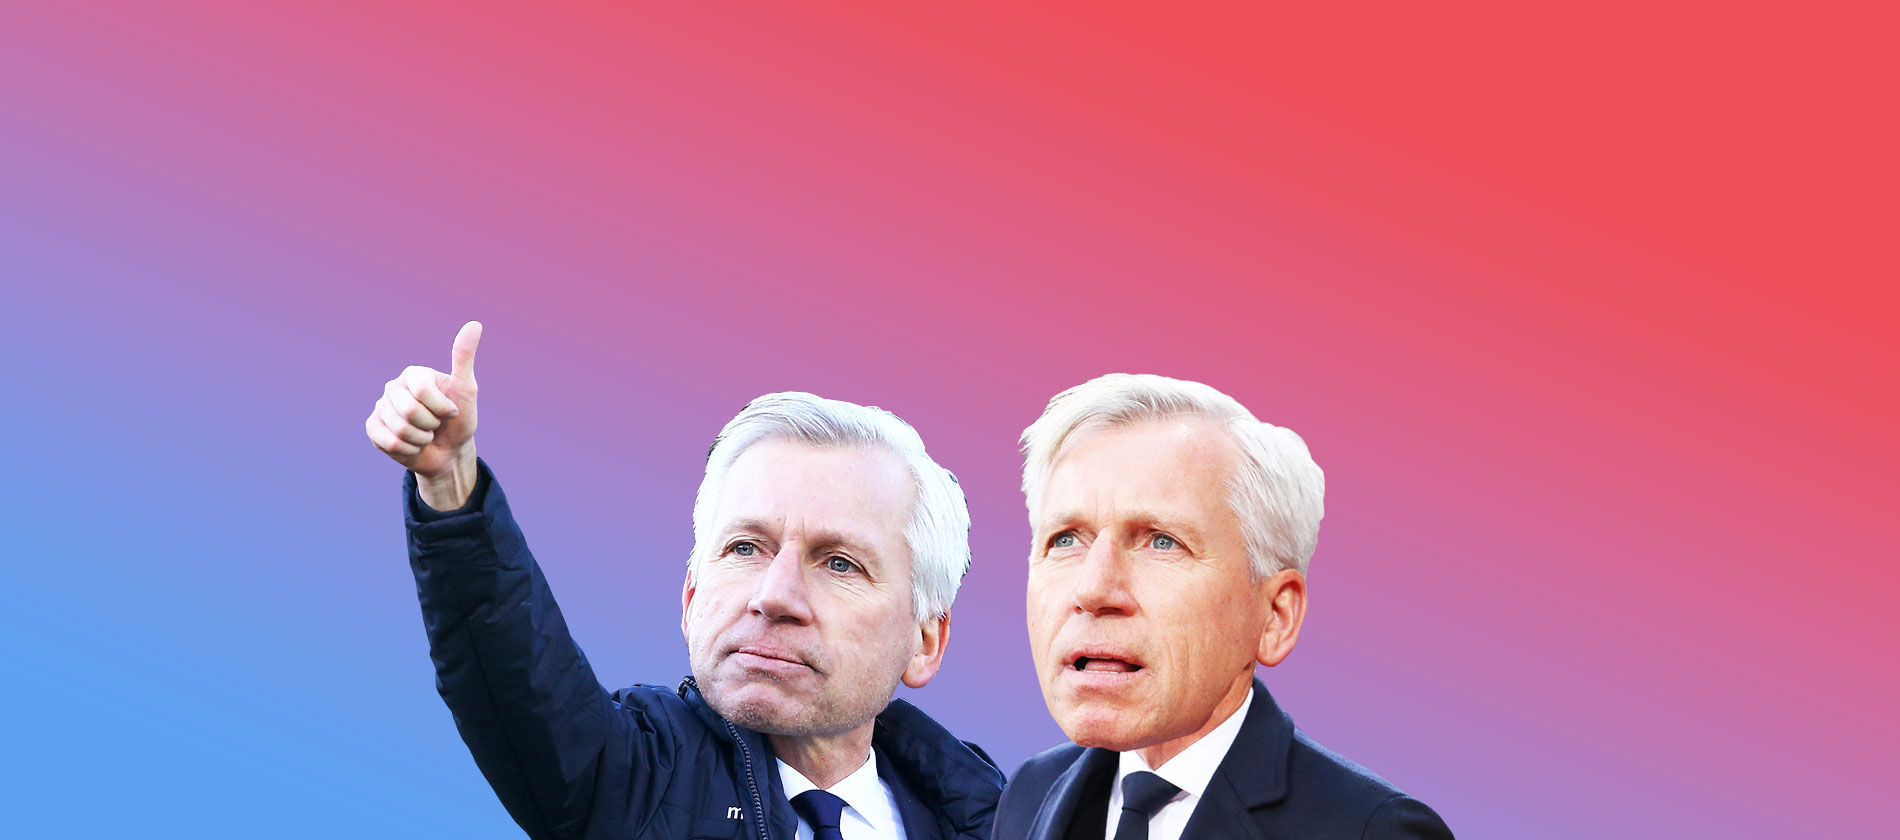 Alan Pardew's woeful Crystal Palace record